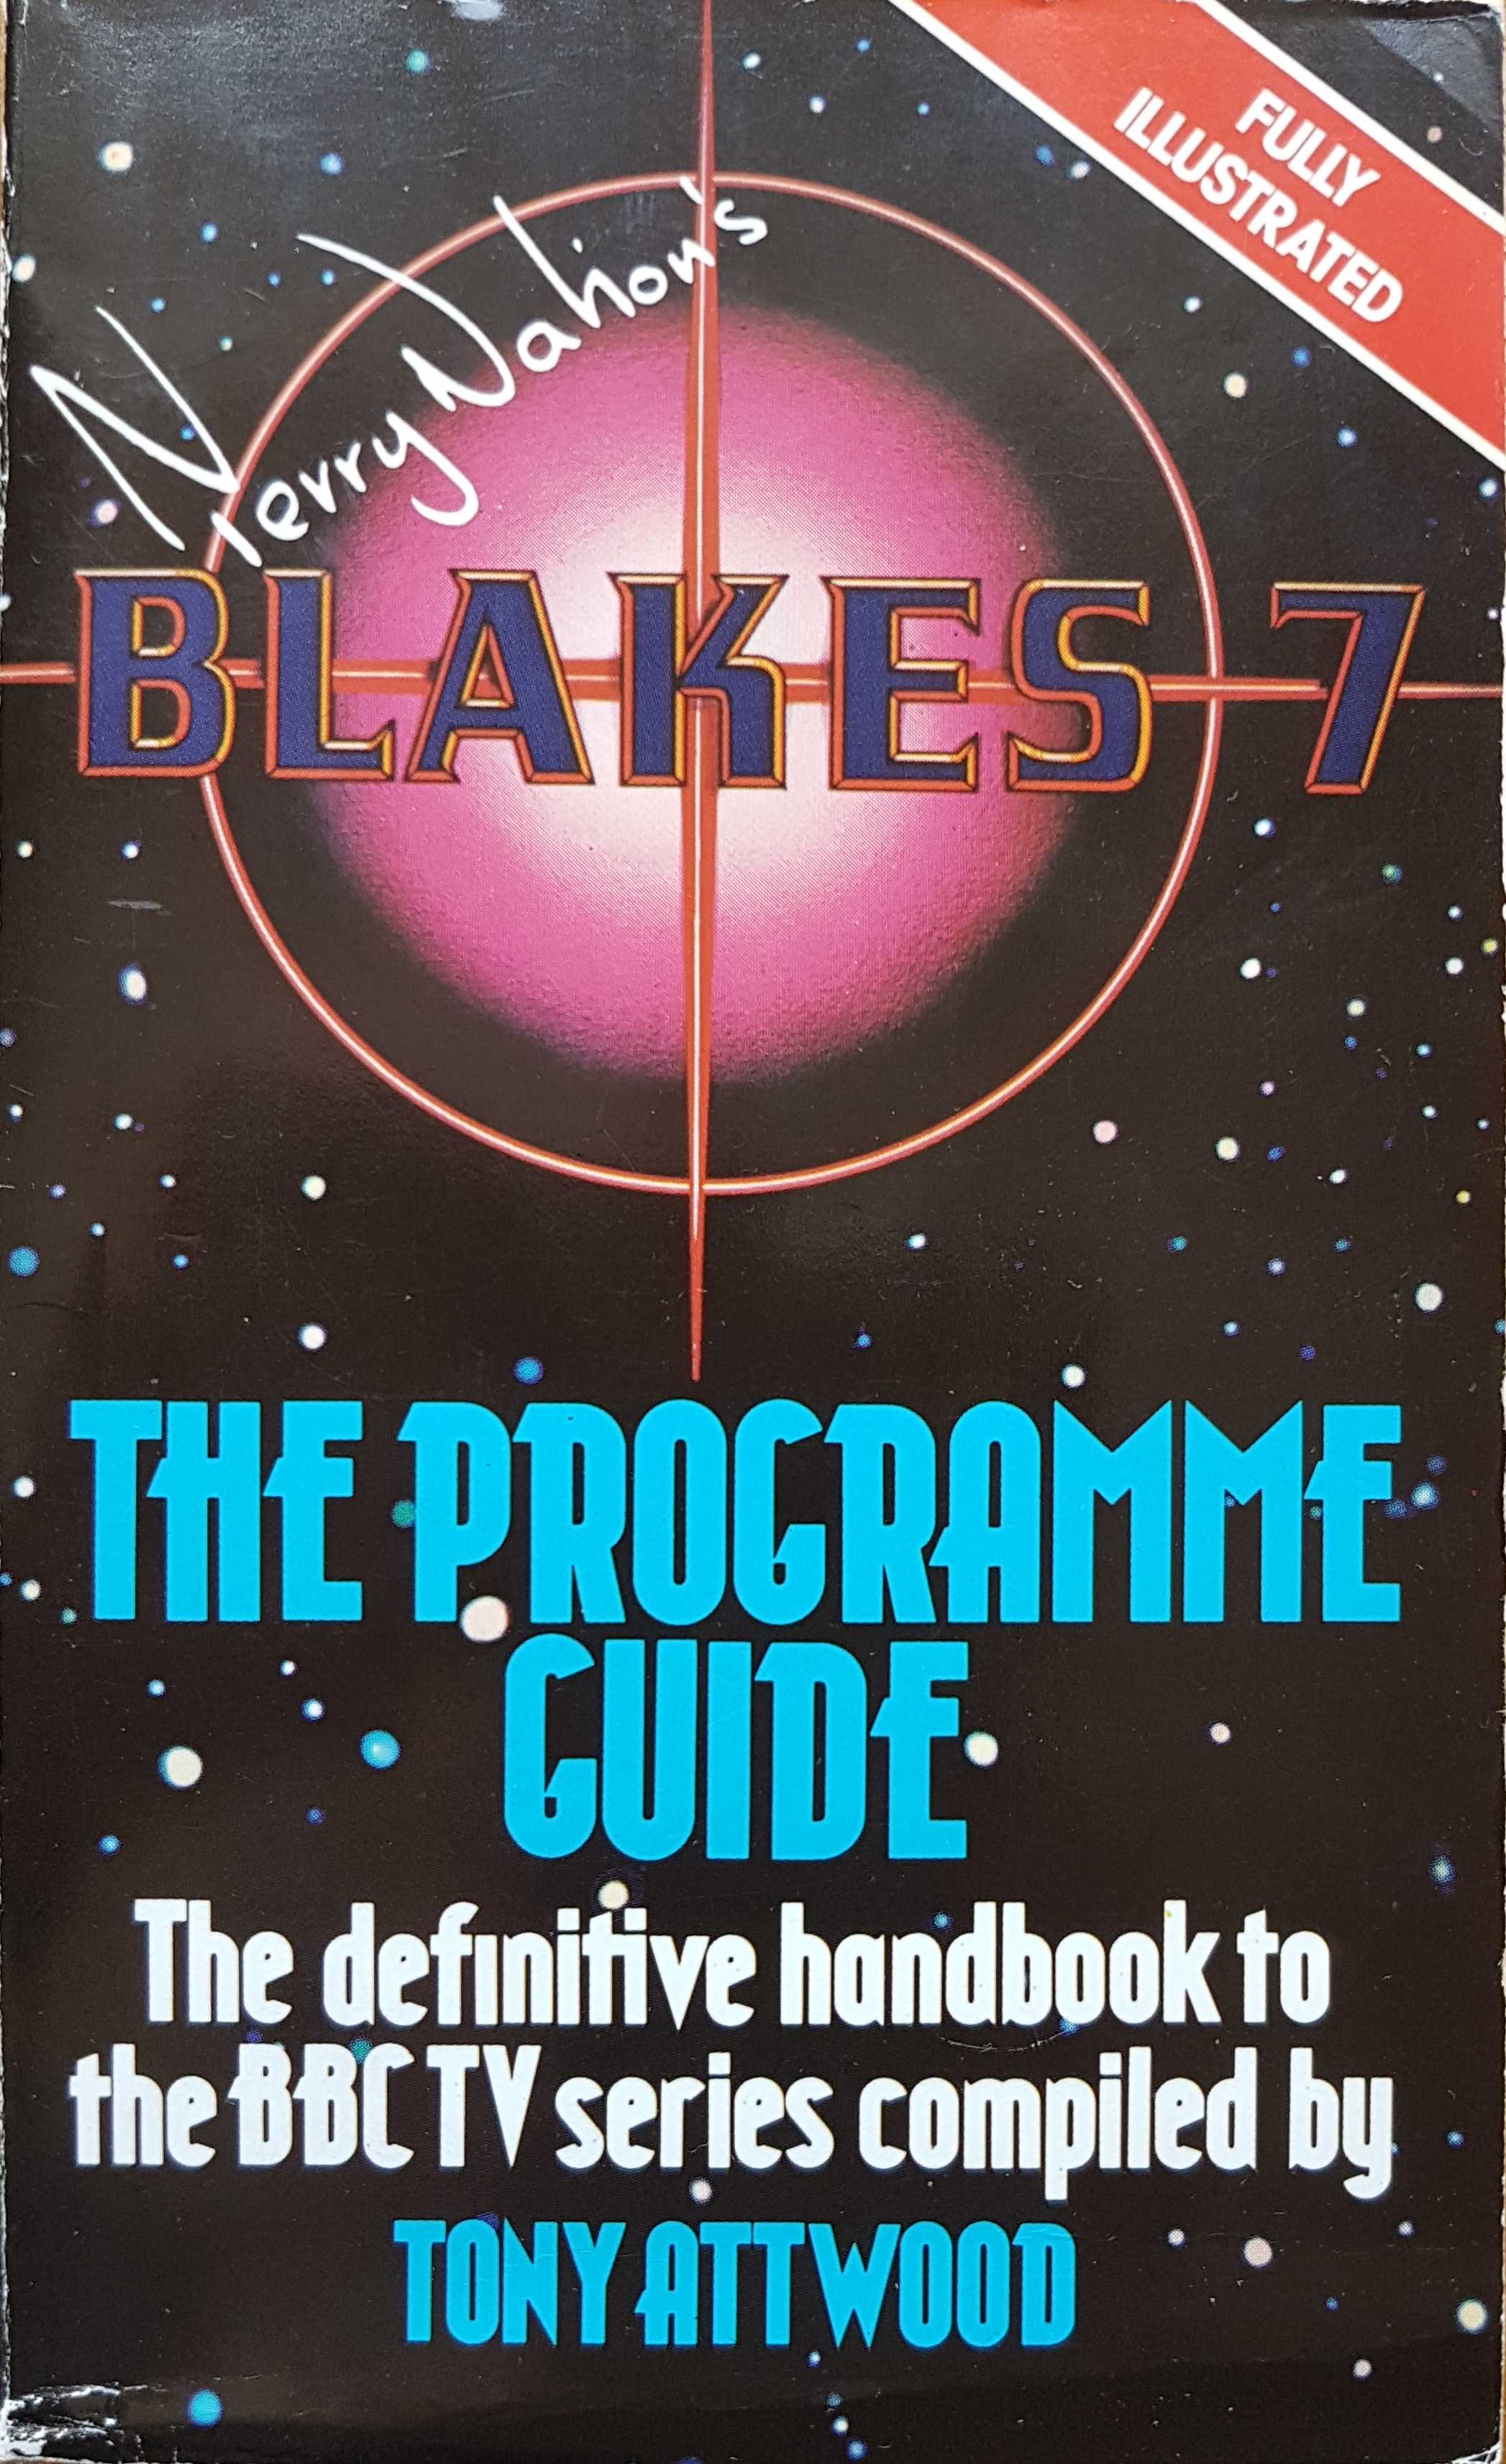 Picture of Blake's 7 - Programme guide by artist Tony Attwood from the BBC books - Records and Tapes library